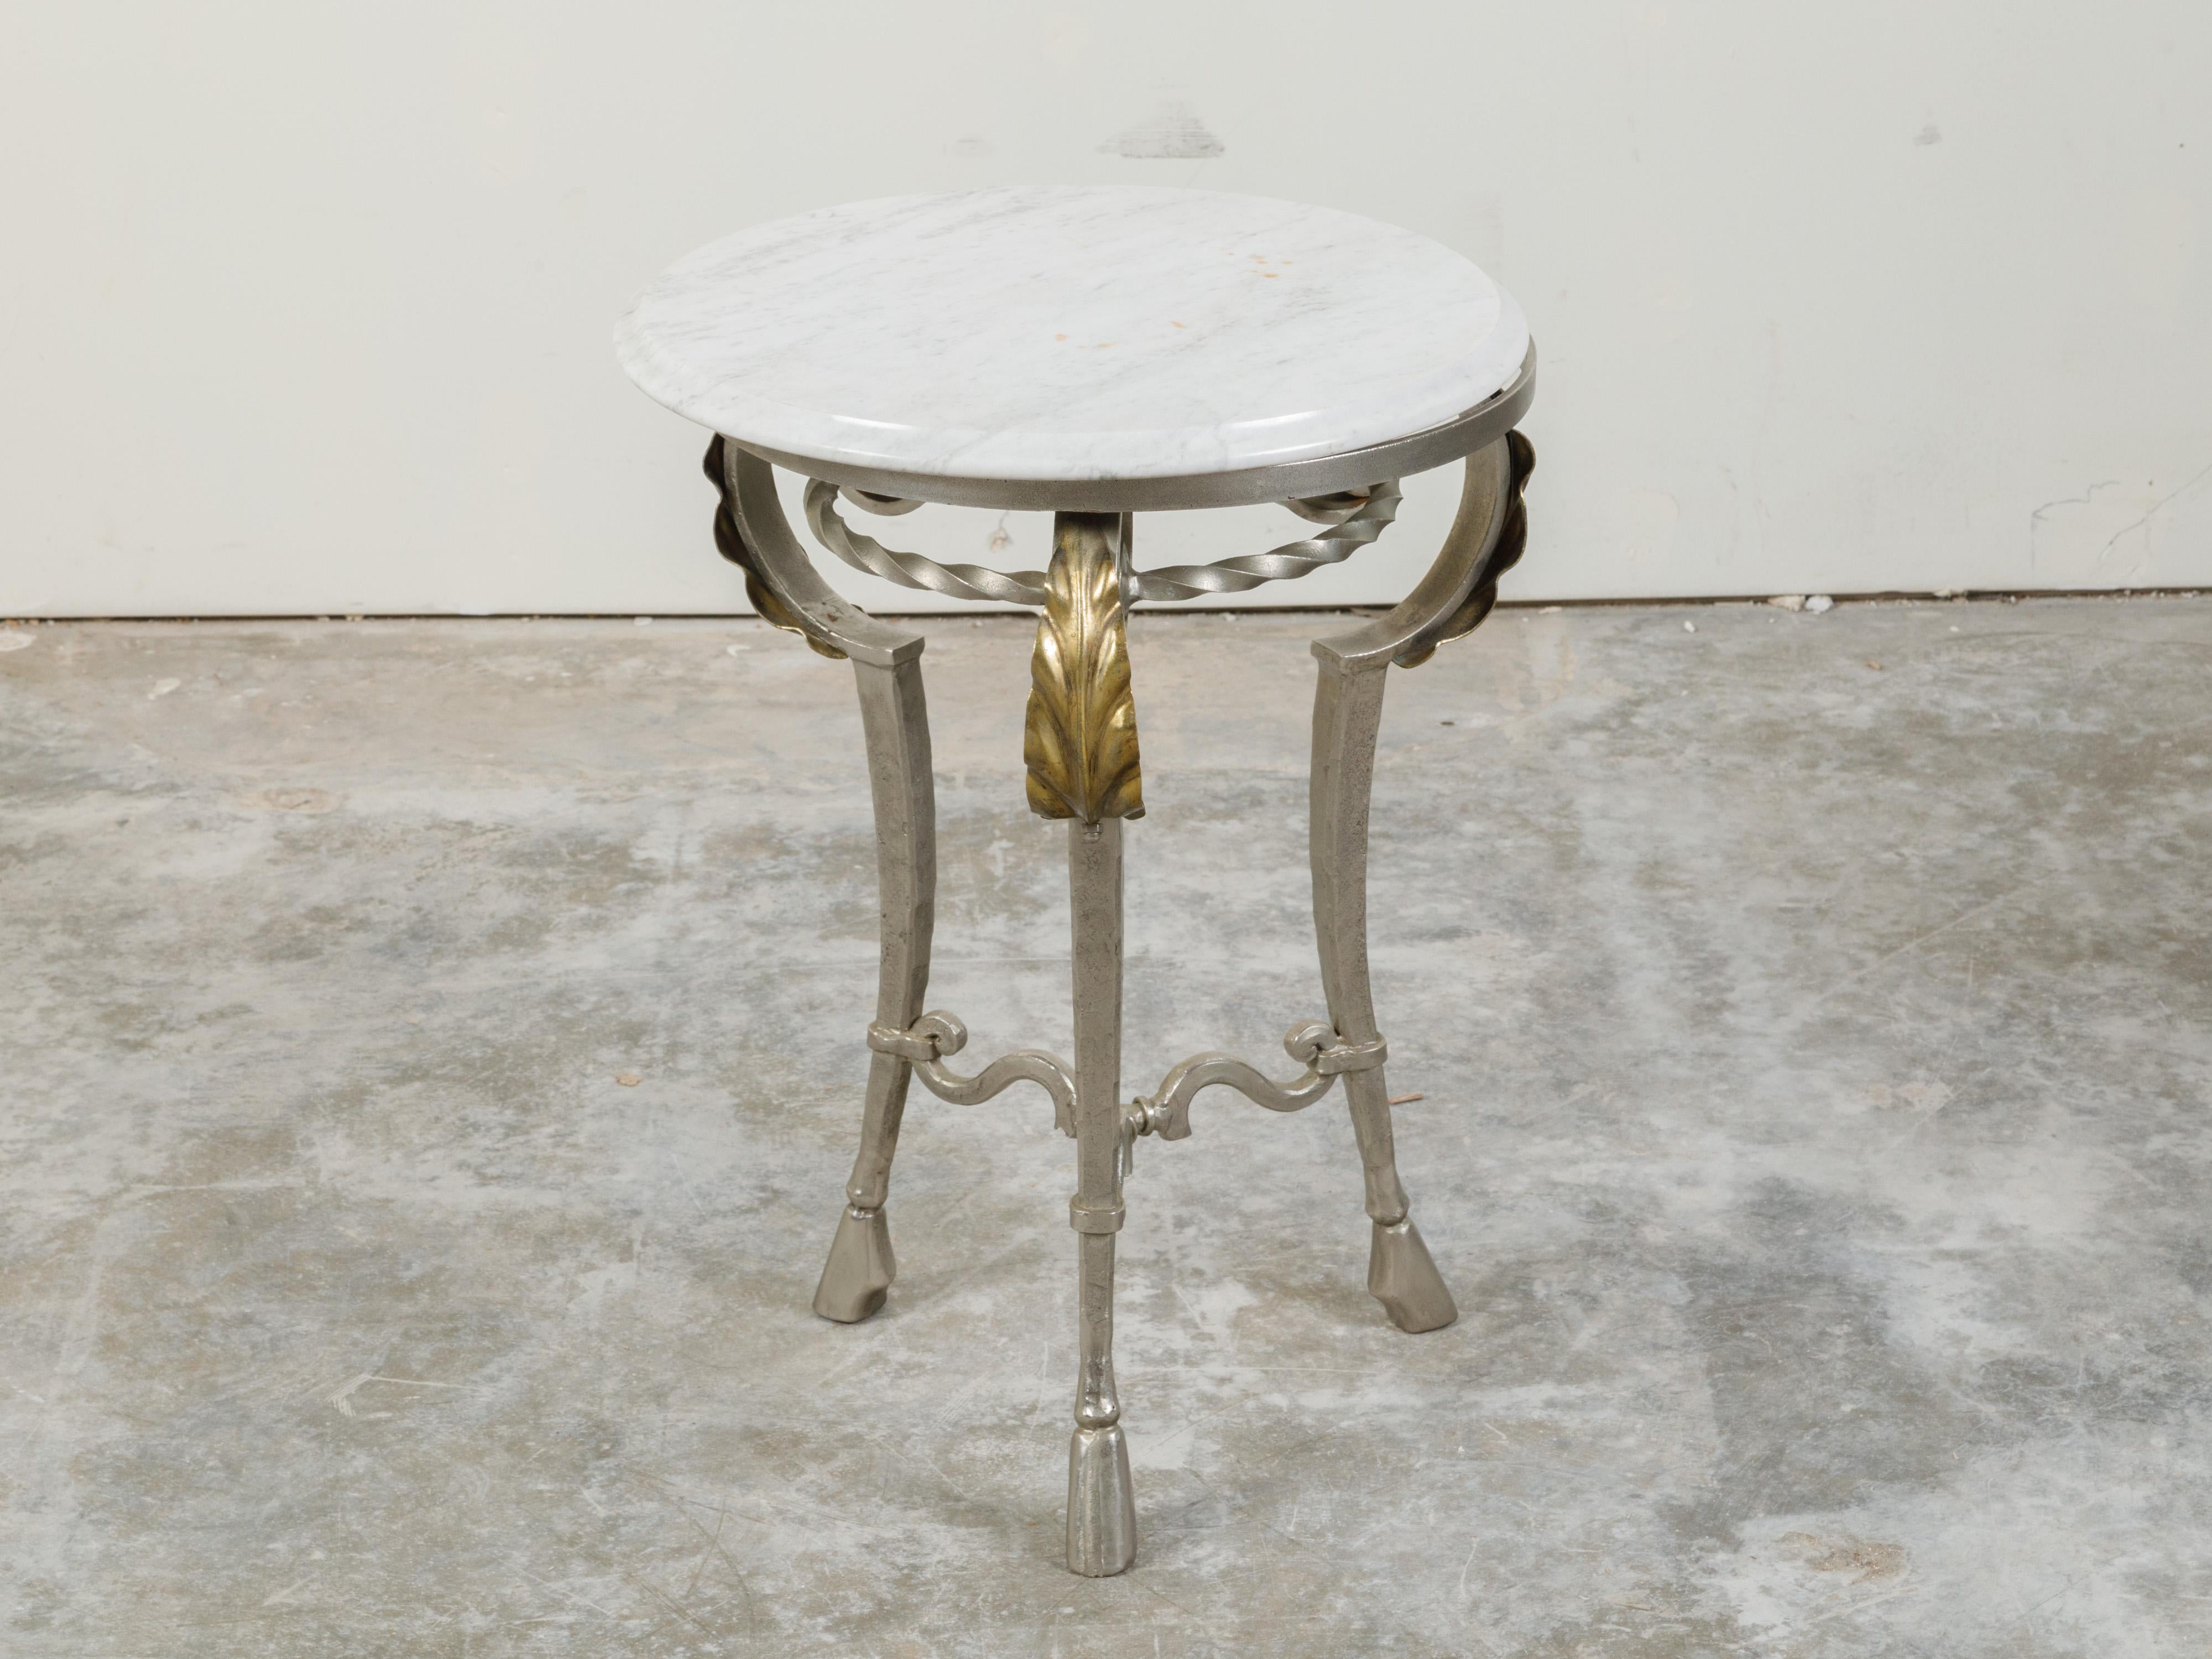 Italian Midcentury Steel Side Table with Circular White Marble Top and Hoof Feet In Good Condition For Sale In Atlanta, GA